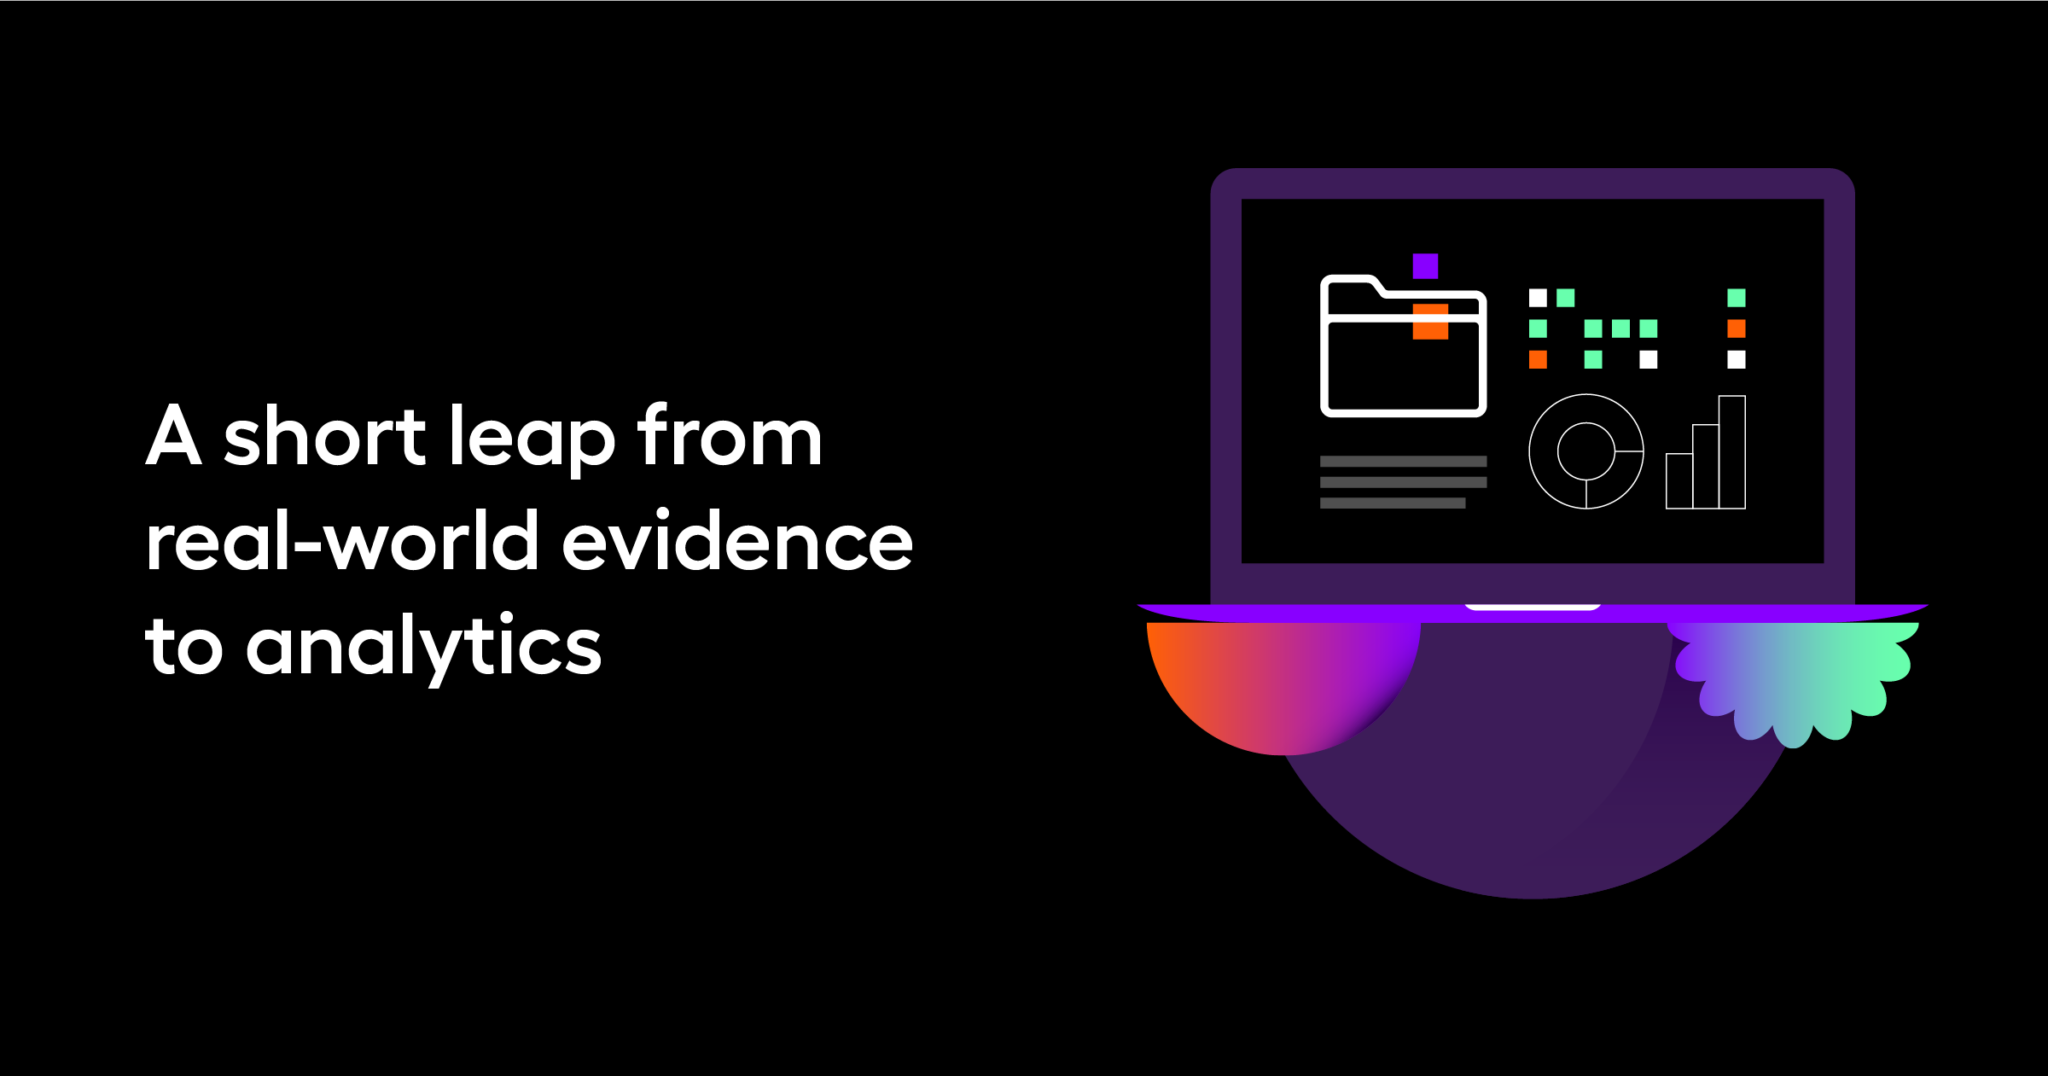 A short leap from real-world evidence to analytics